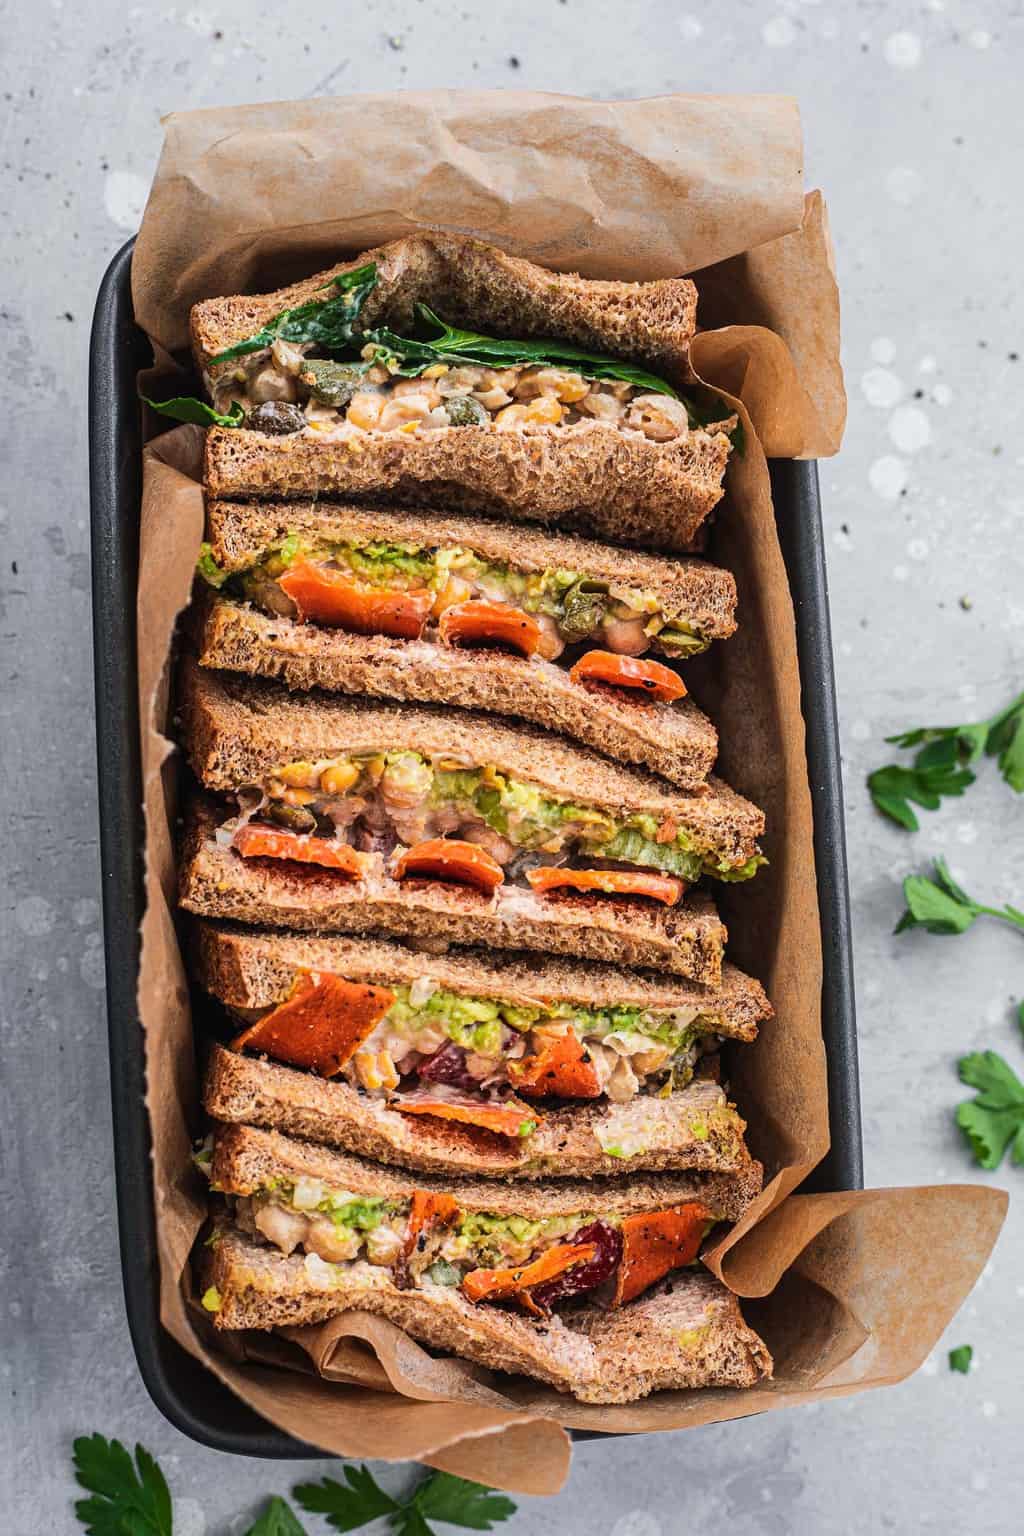 Vegan sandwiches with chickpea 'tuna' and carrots